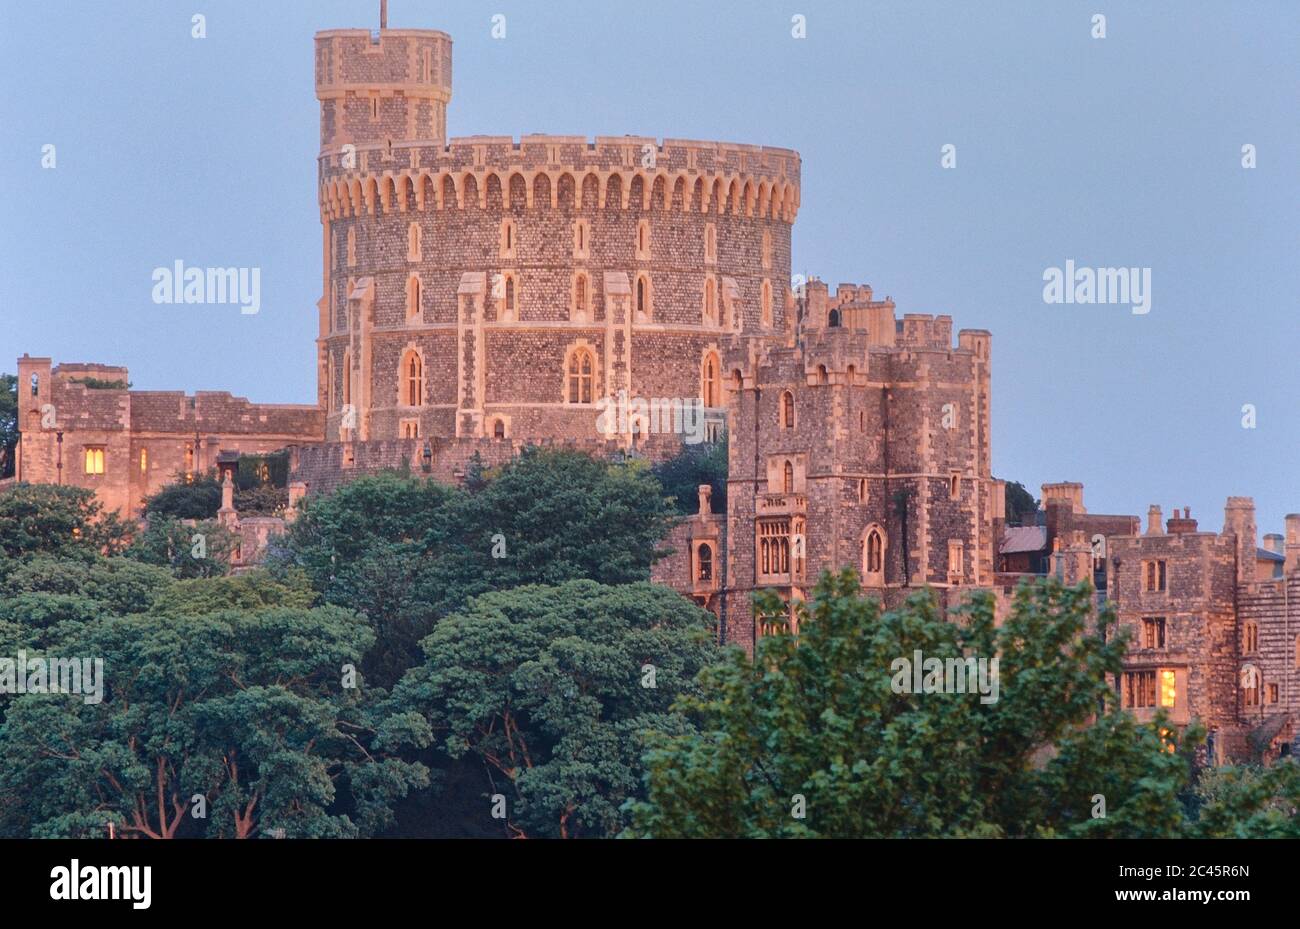 The Round Tower or Keep, Windsor Castle, Berkshire, England, UK Stock Photo